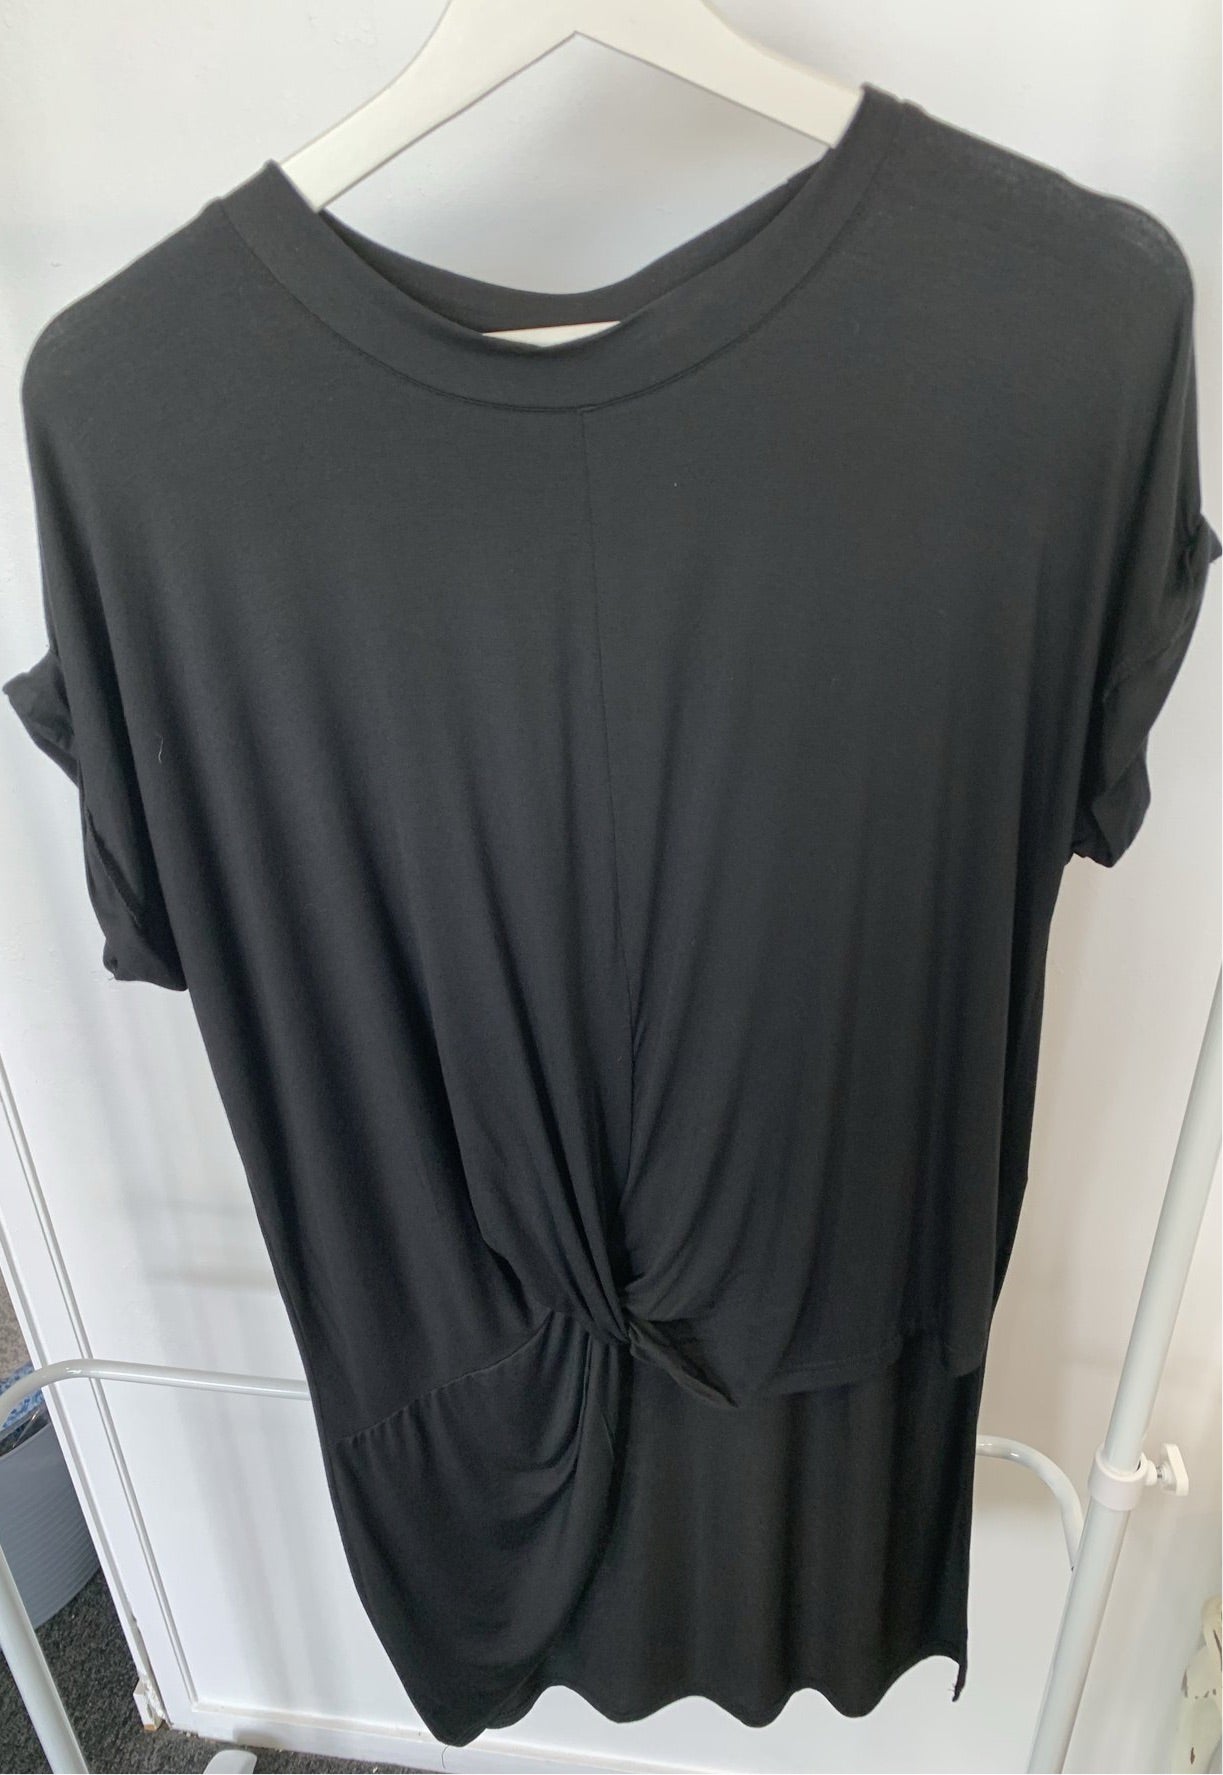 Silver Wishes Black Knot Twist Top with High Low Hemline Short Sleeves